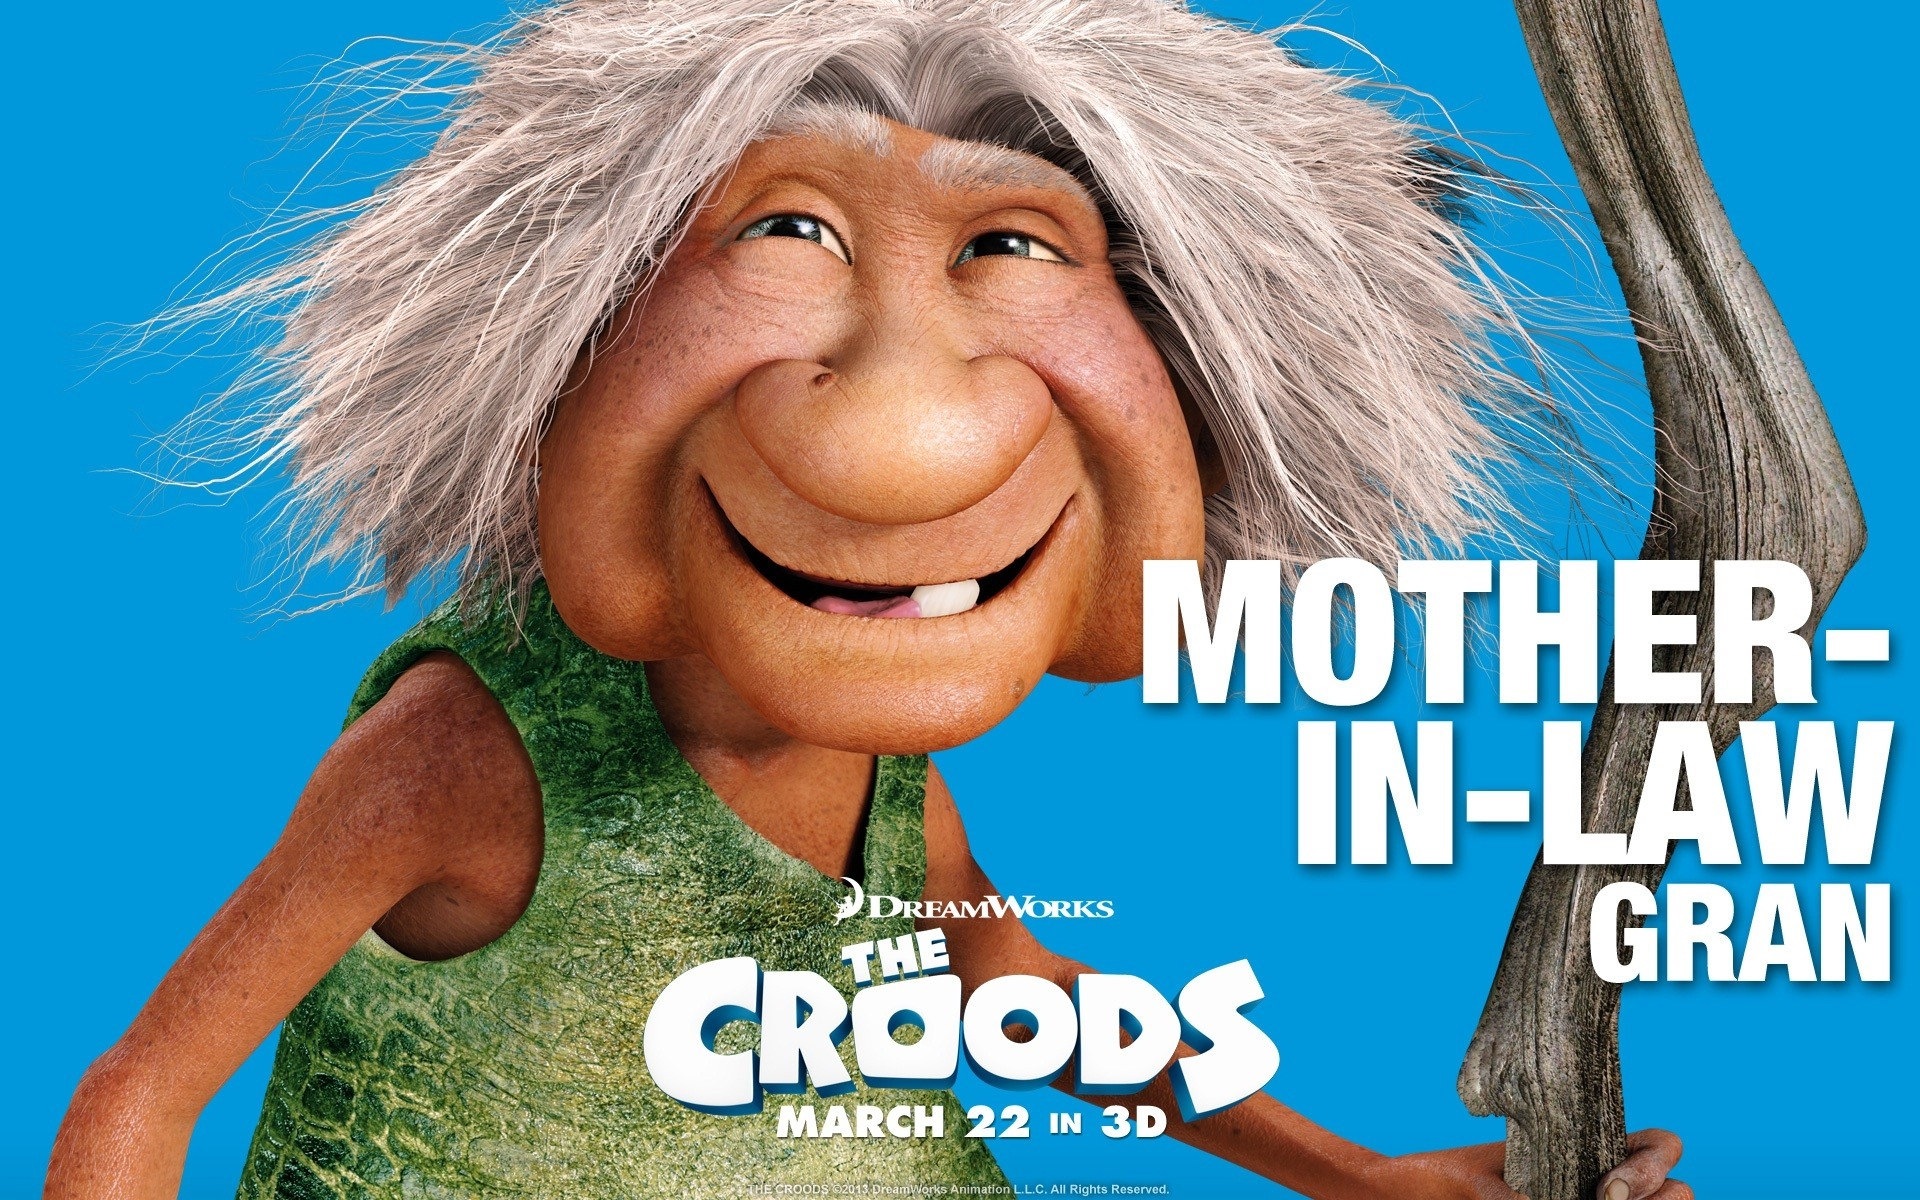 The Croods HD movie wallpapers #6 - 1920x1200